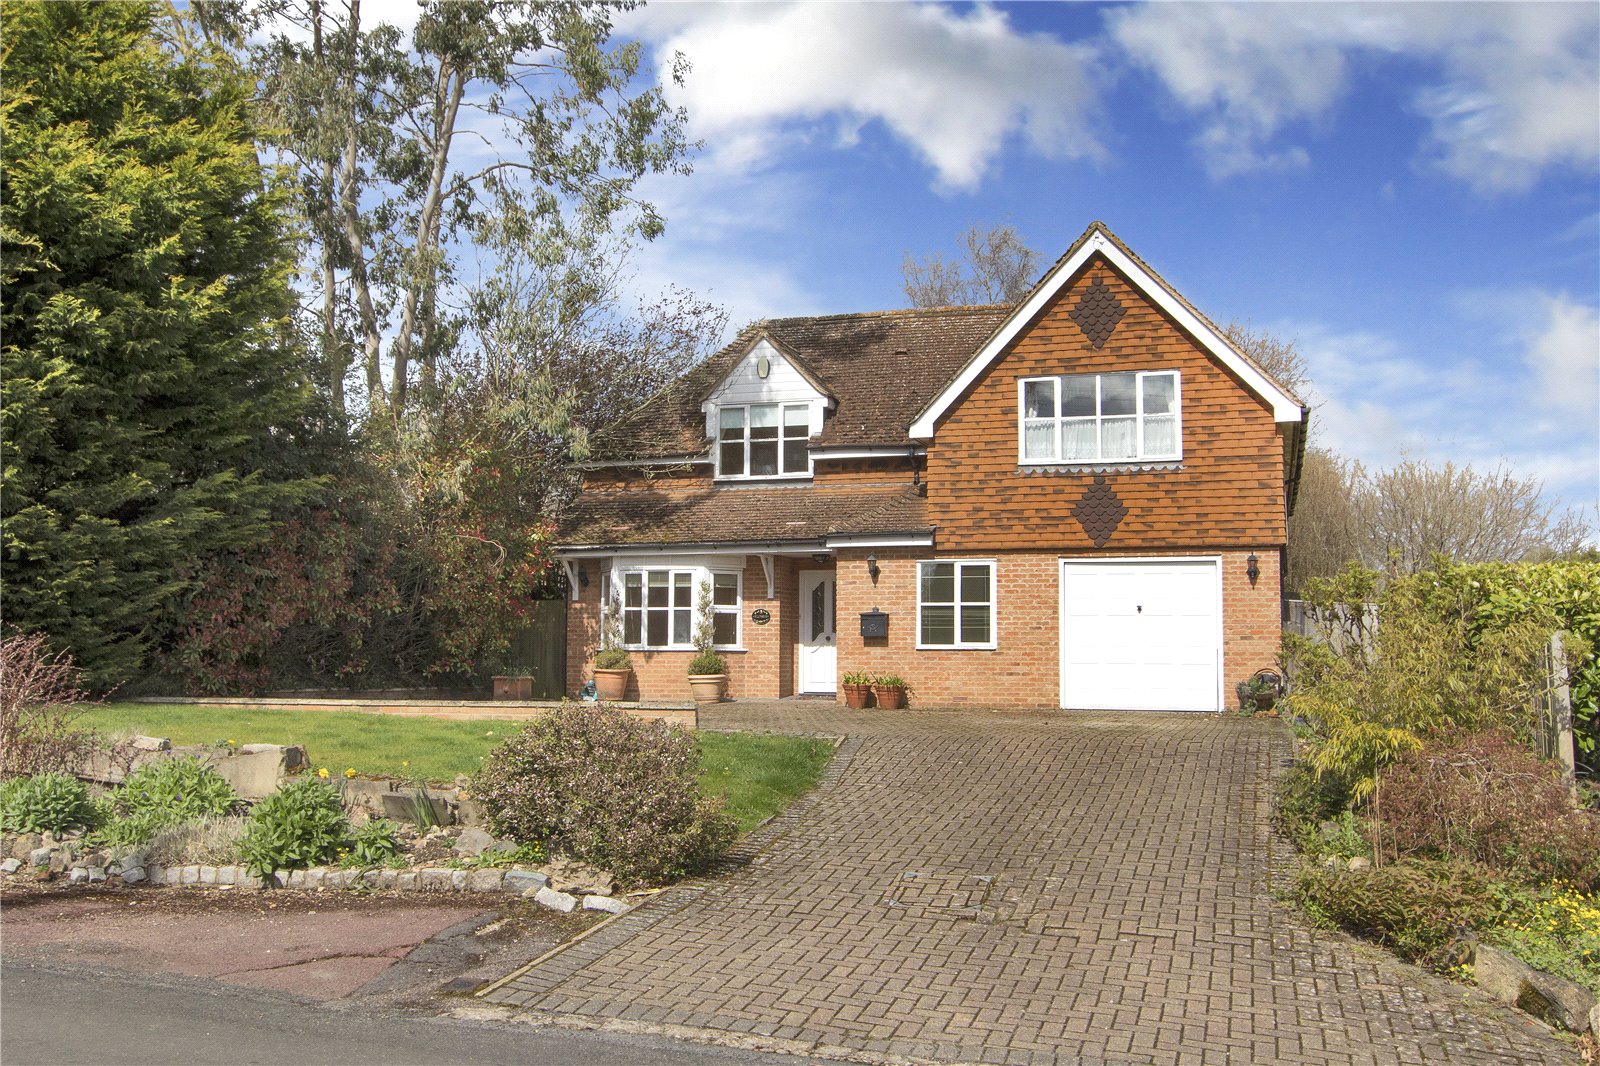 5 bedroom detached house for sale in Waterlooville